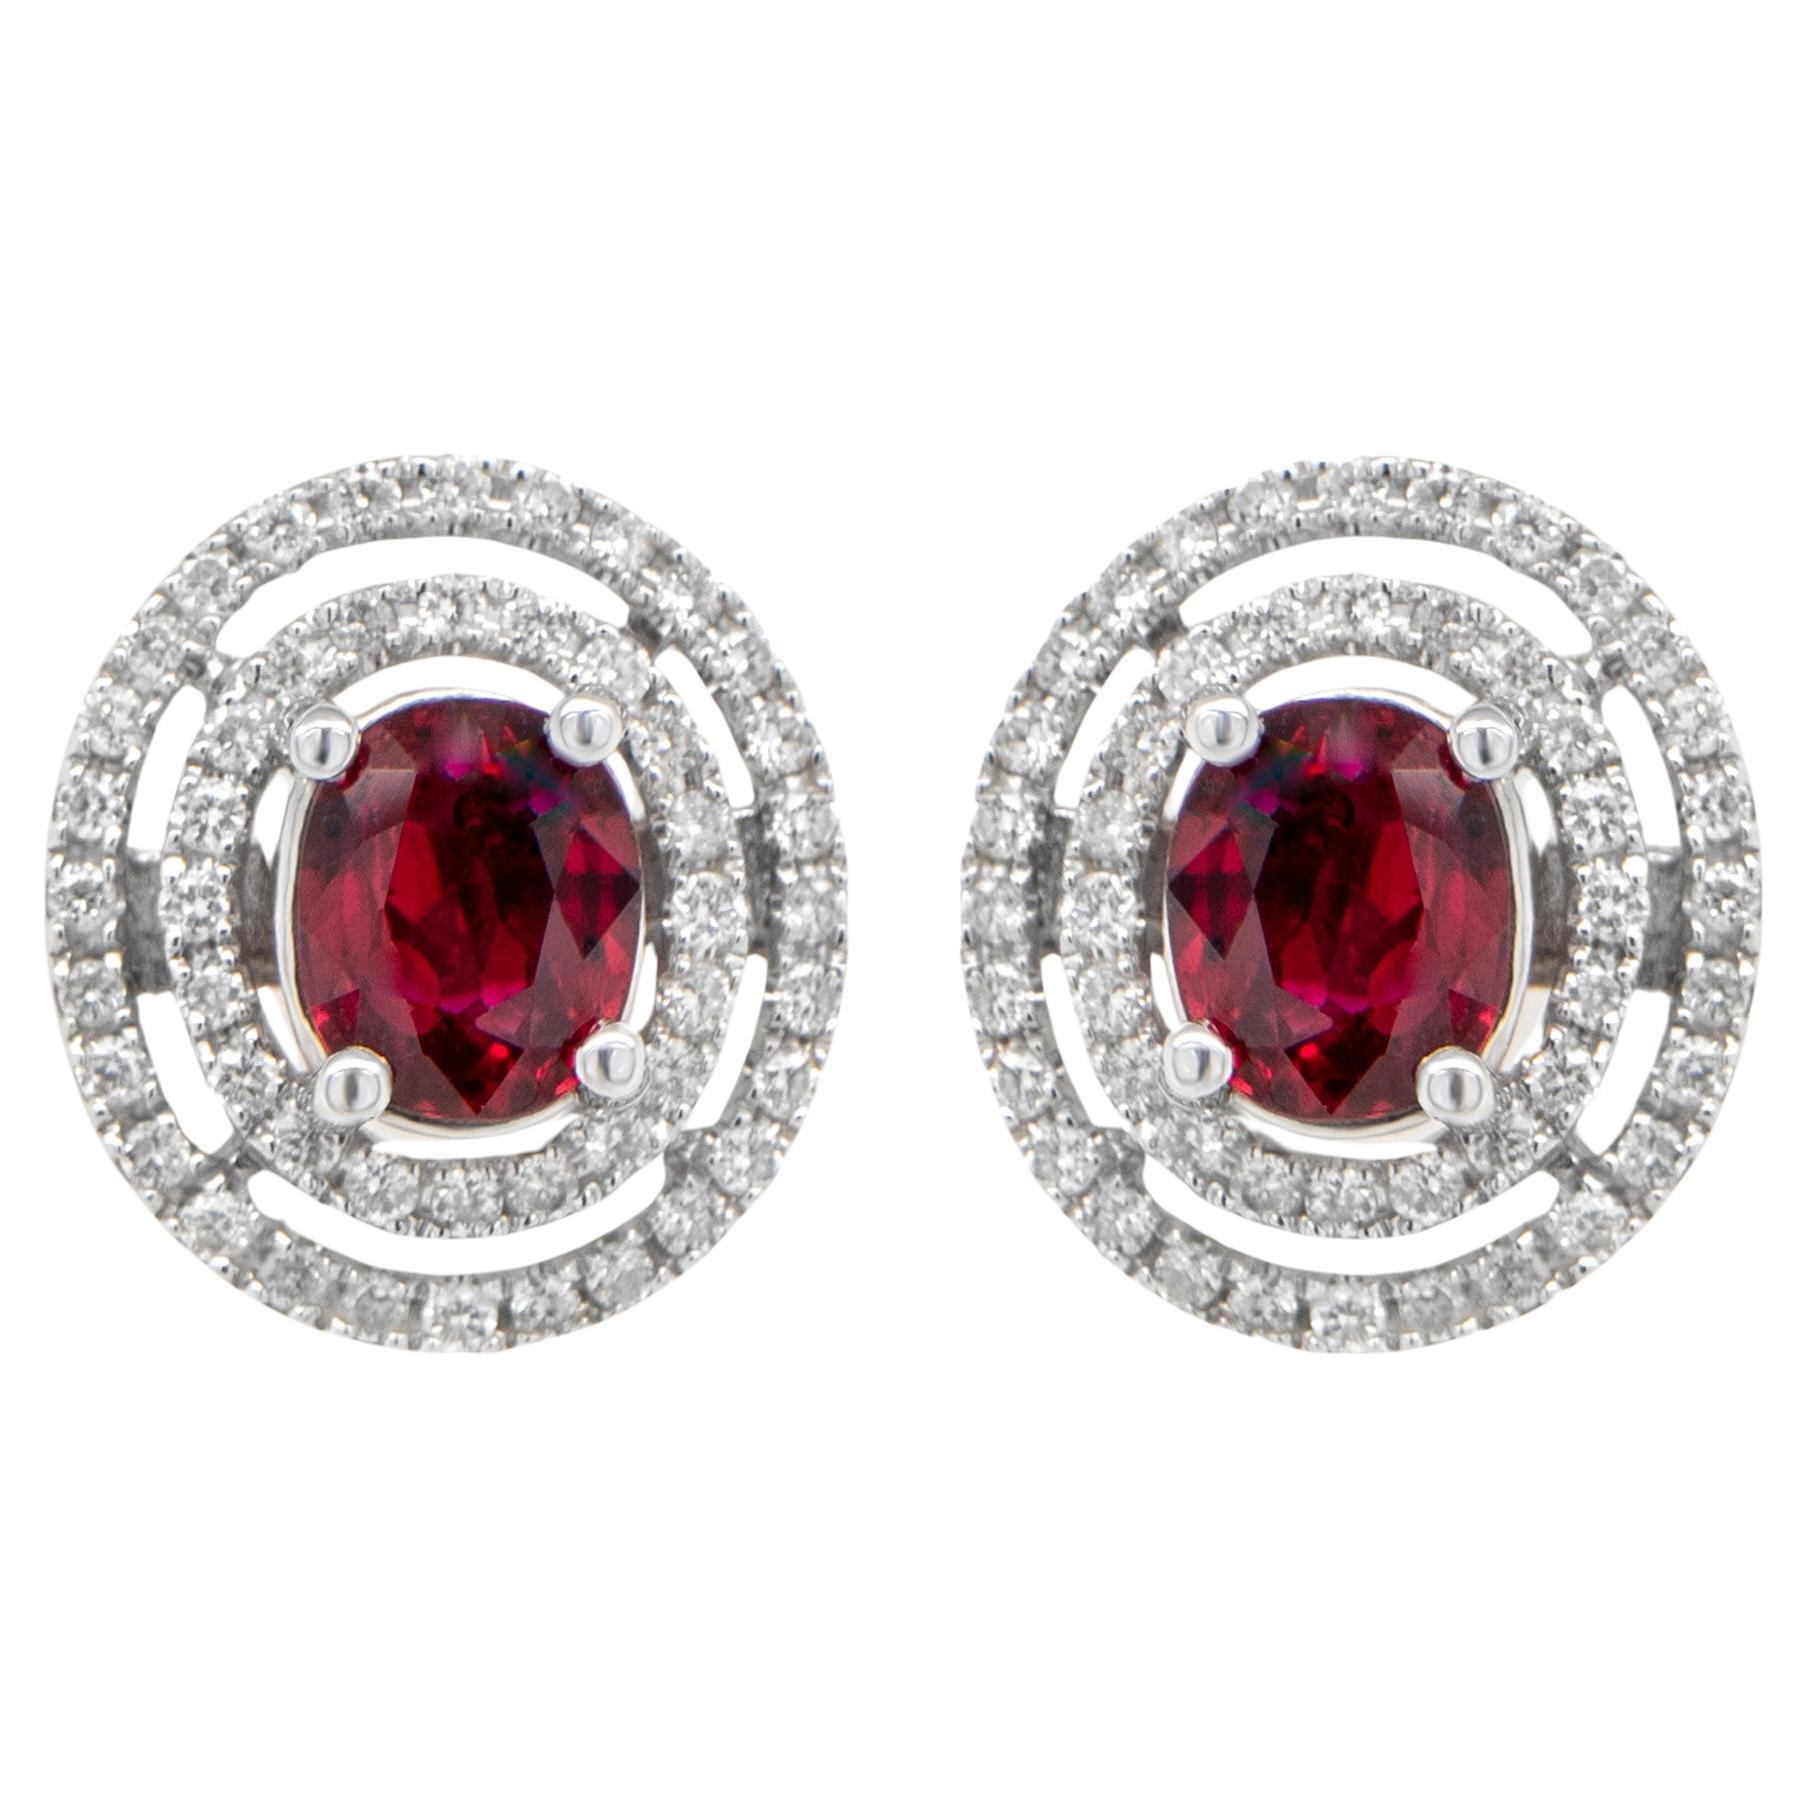 Burma Ruby and Diamond Stud Earrings 3.28 Carats Total 18k White Gold For Sale